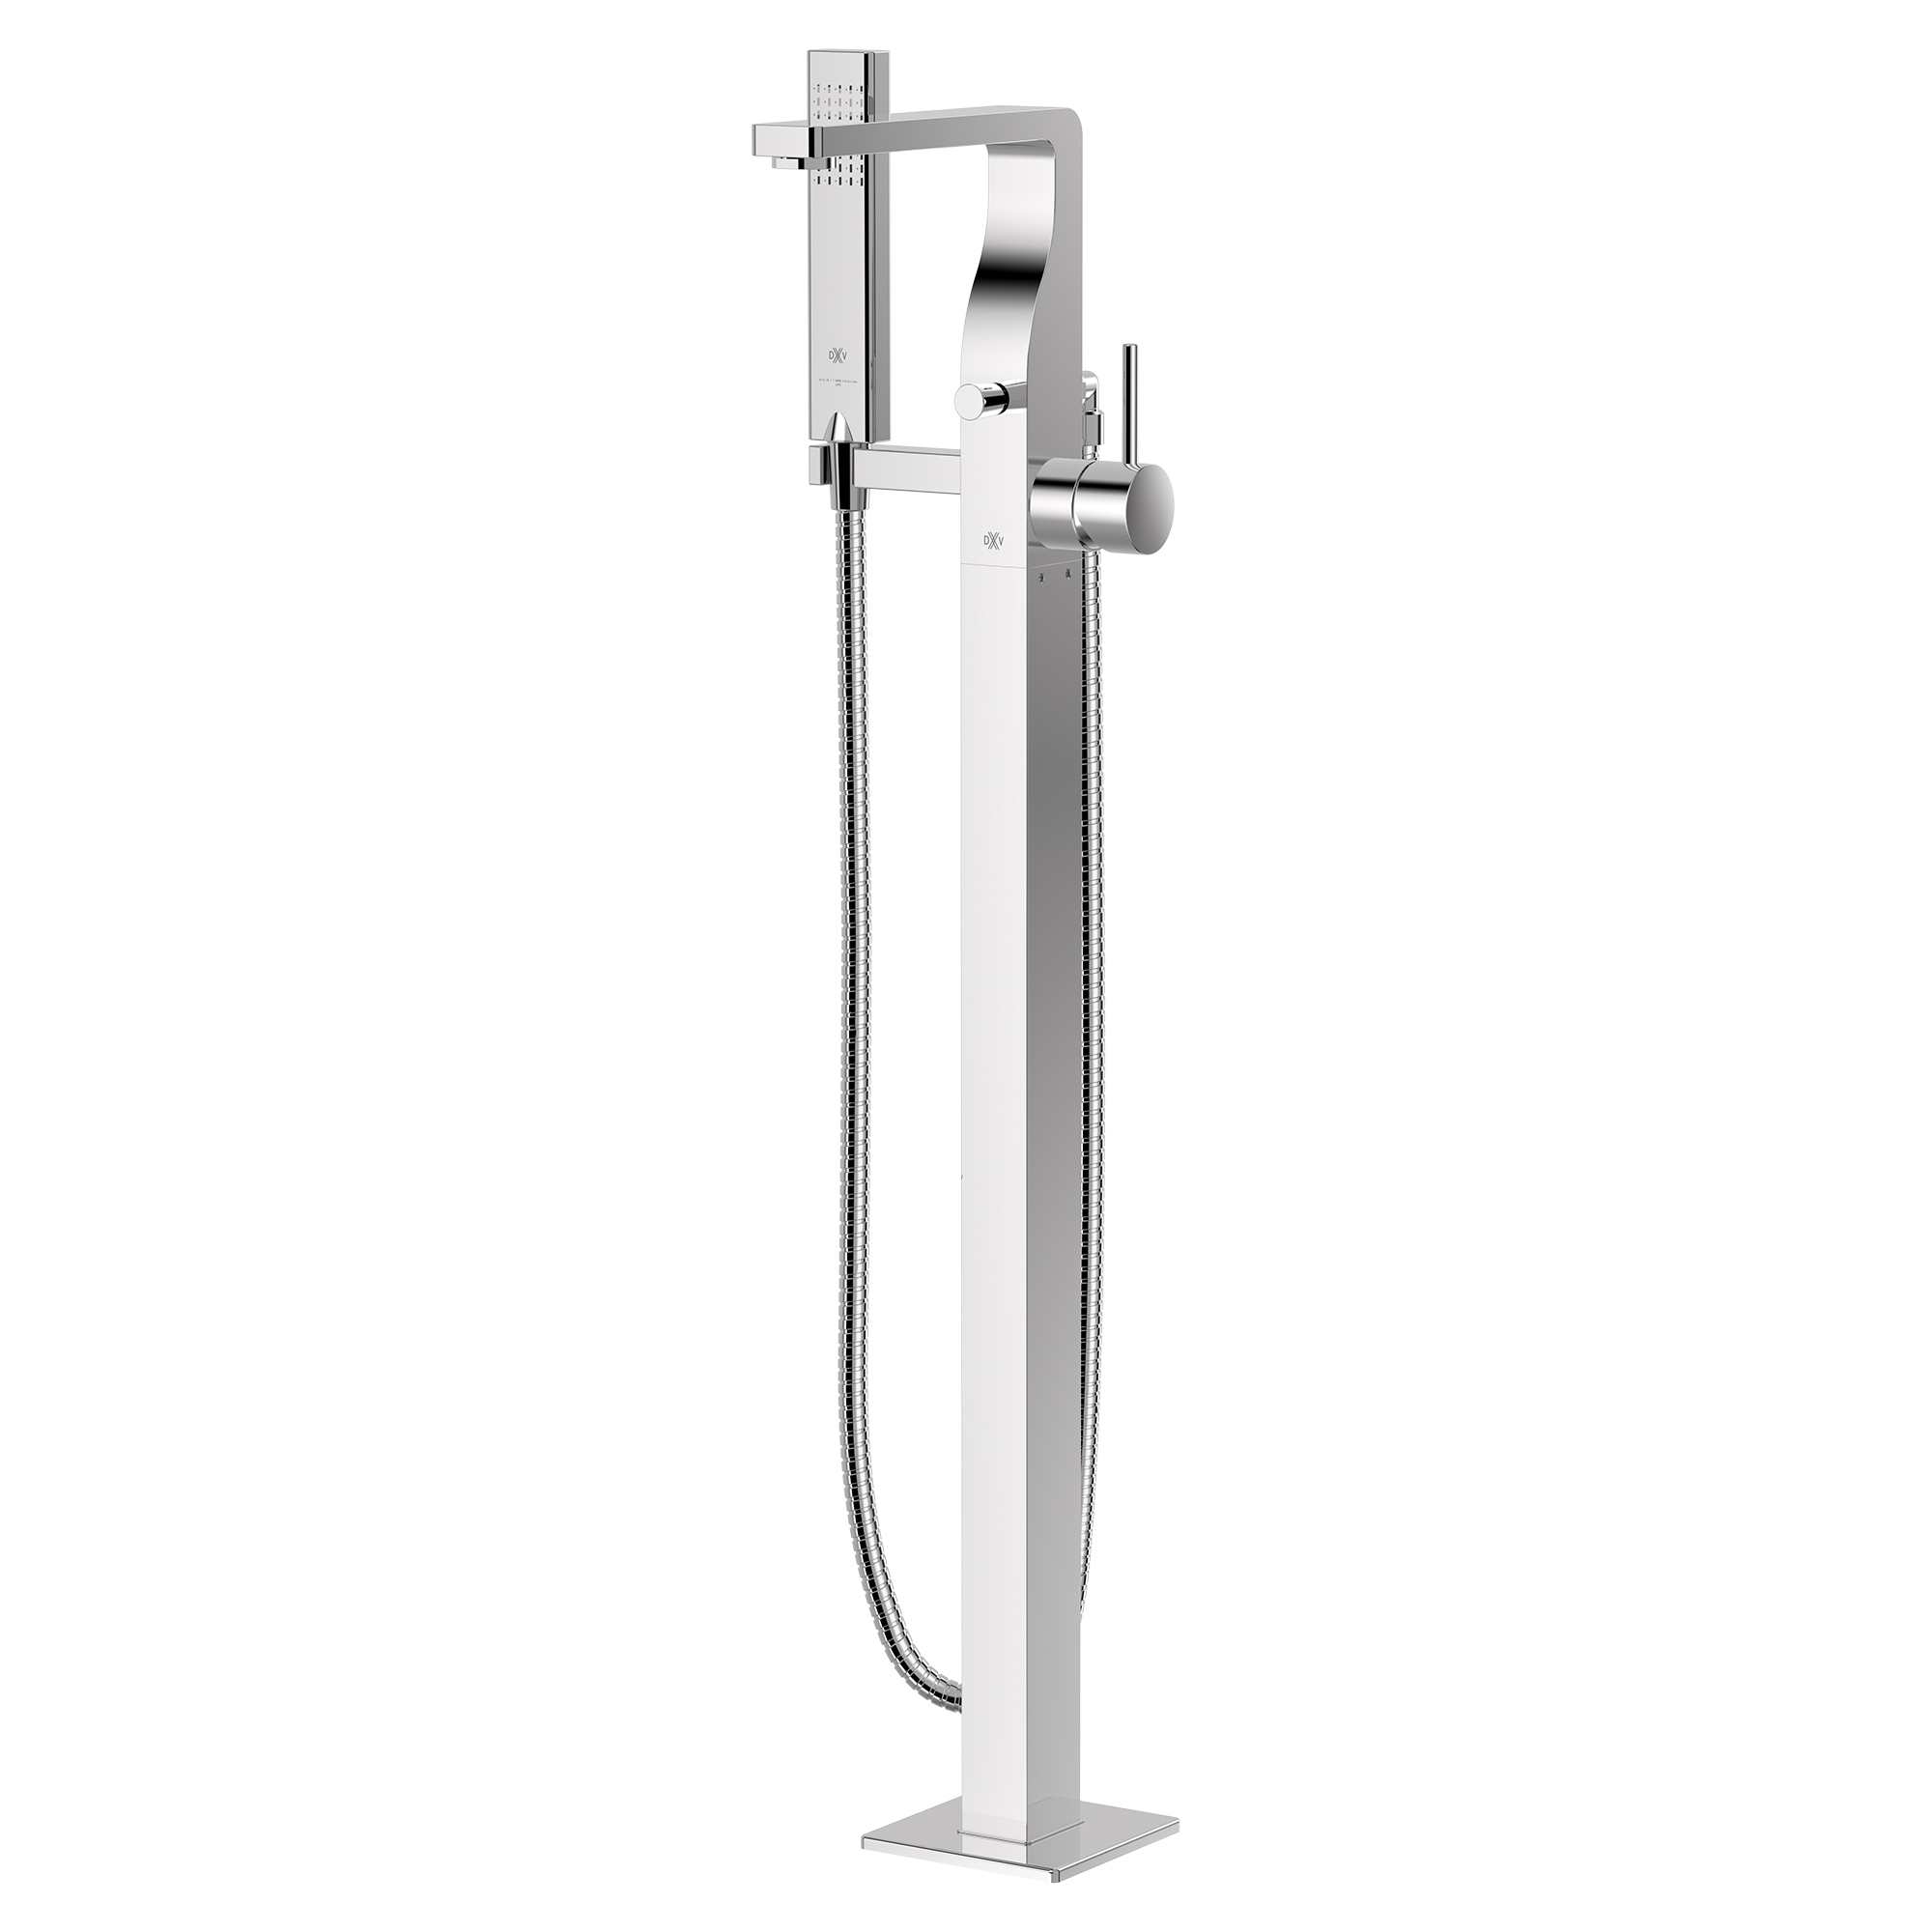 Equility Square Floor Mount Bathtub Filler with Hand Shower and Lever Handle